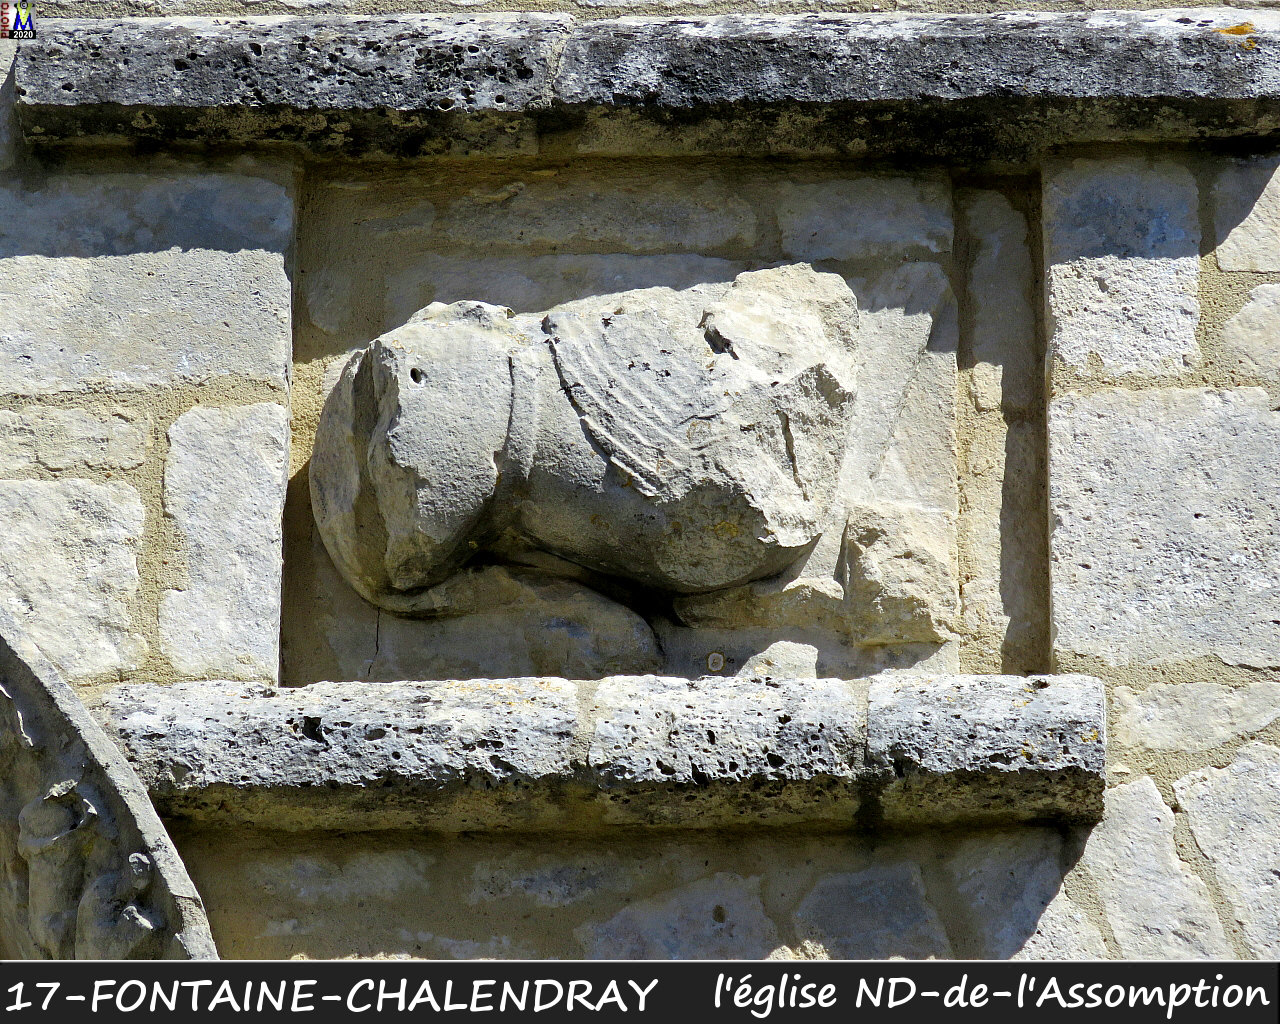 17FONTAINE-CHALENDRAY_eglise_1028.jpg